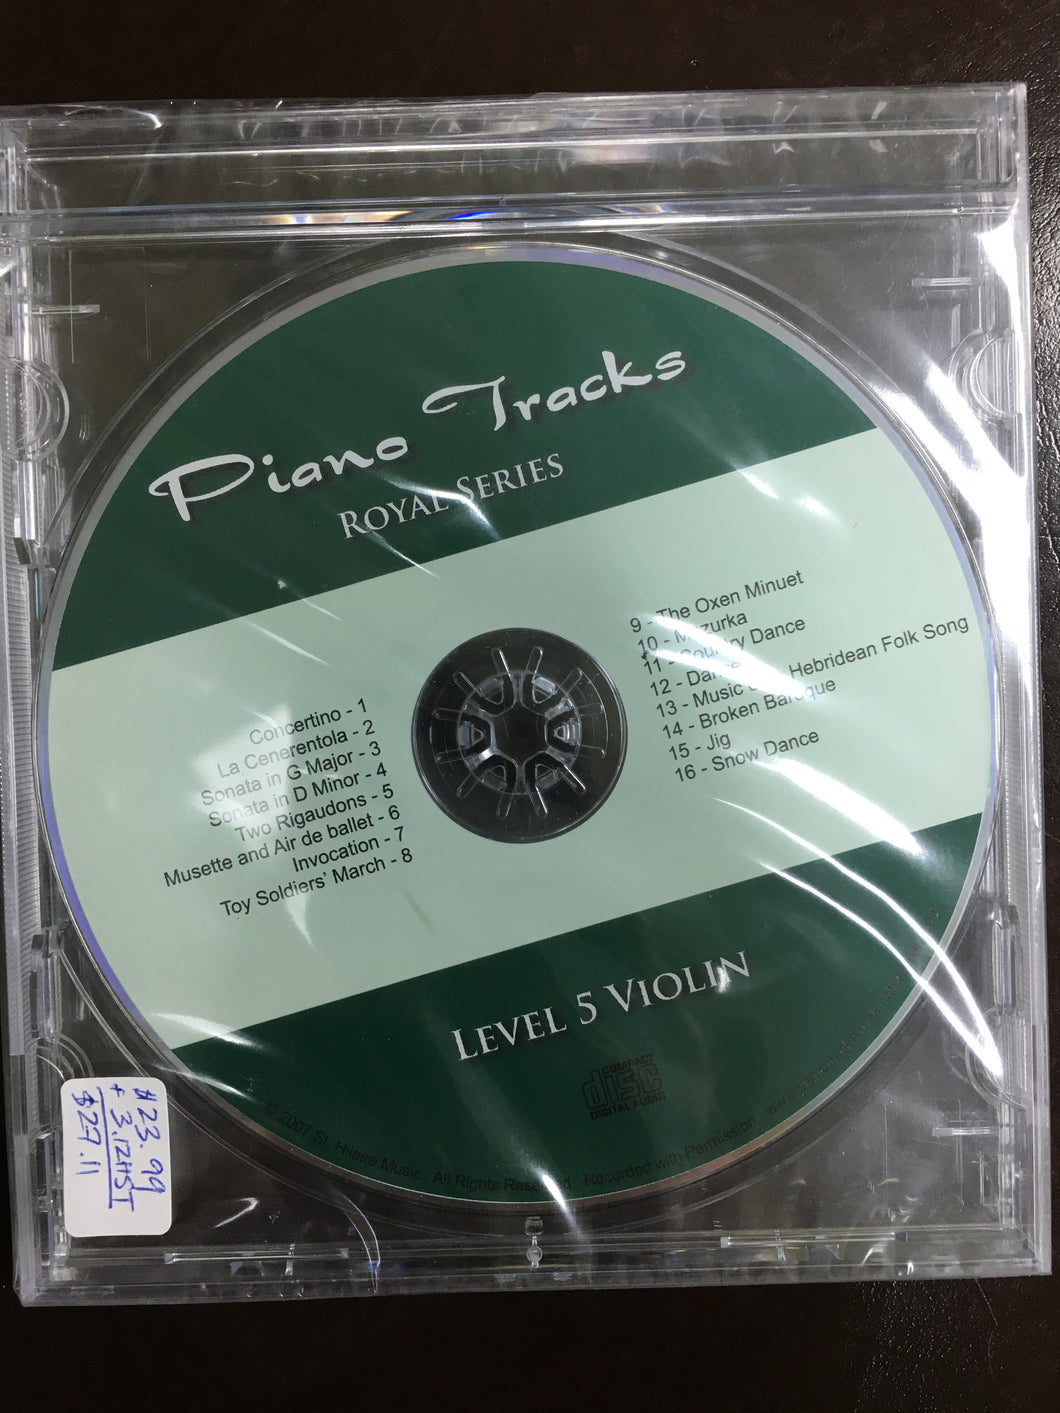 Piano Tracks Royal Series for Violin - Gr. 5 released 2007